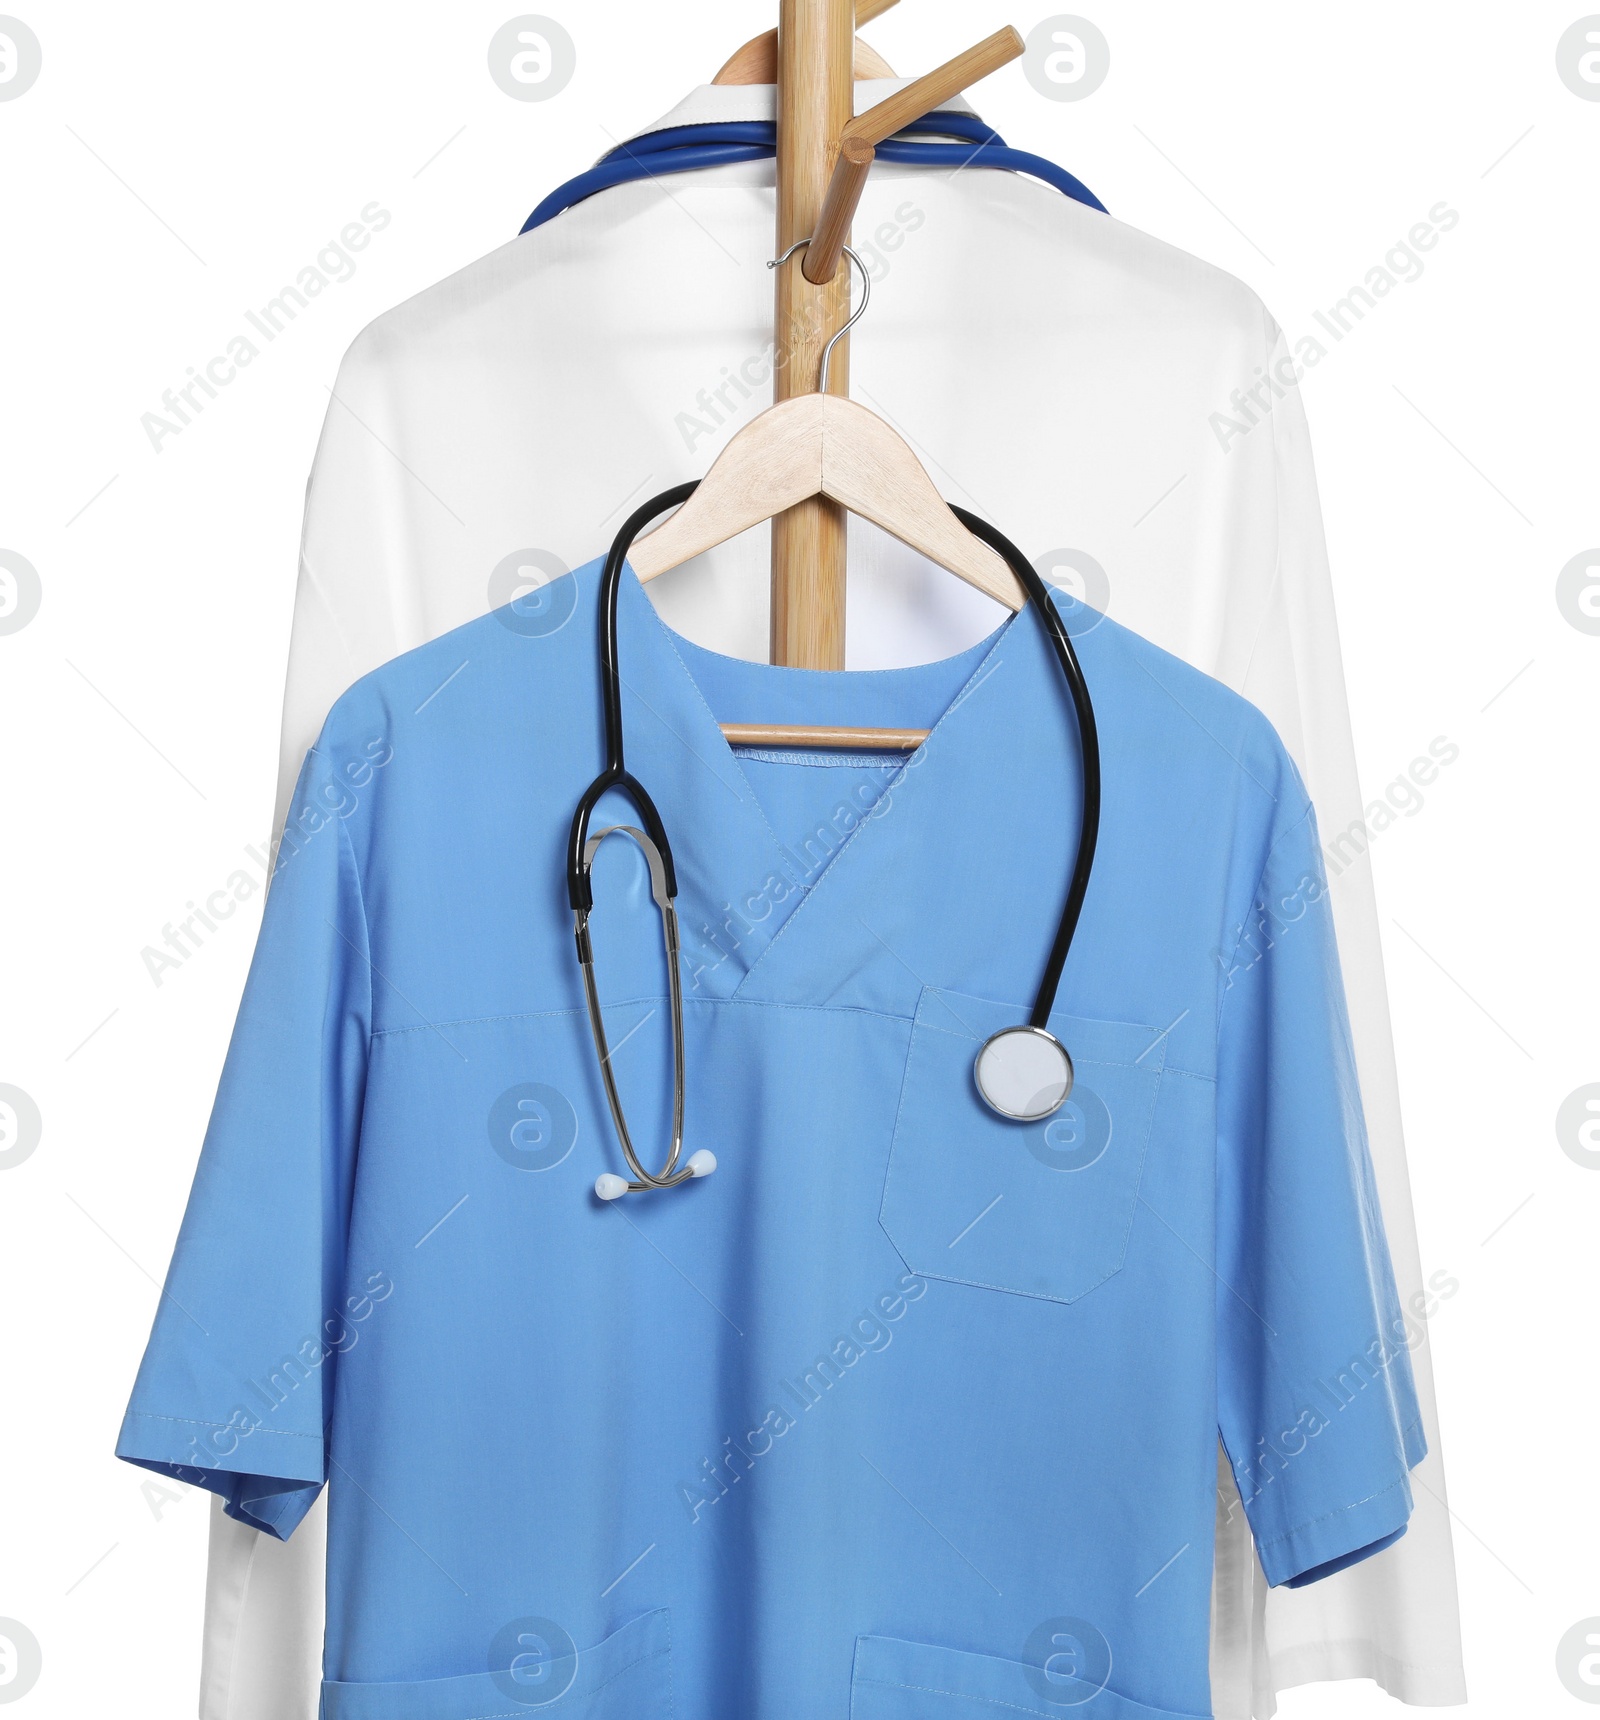 Photo of Light blue medical uniform with stethoscope and doctor's gown on rack against white background